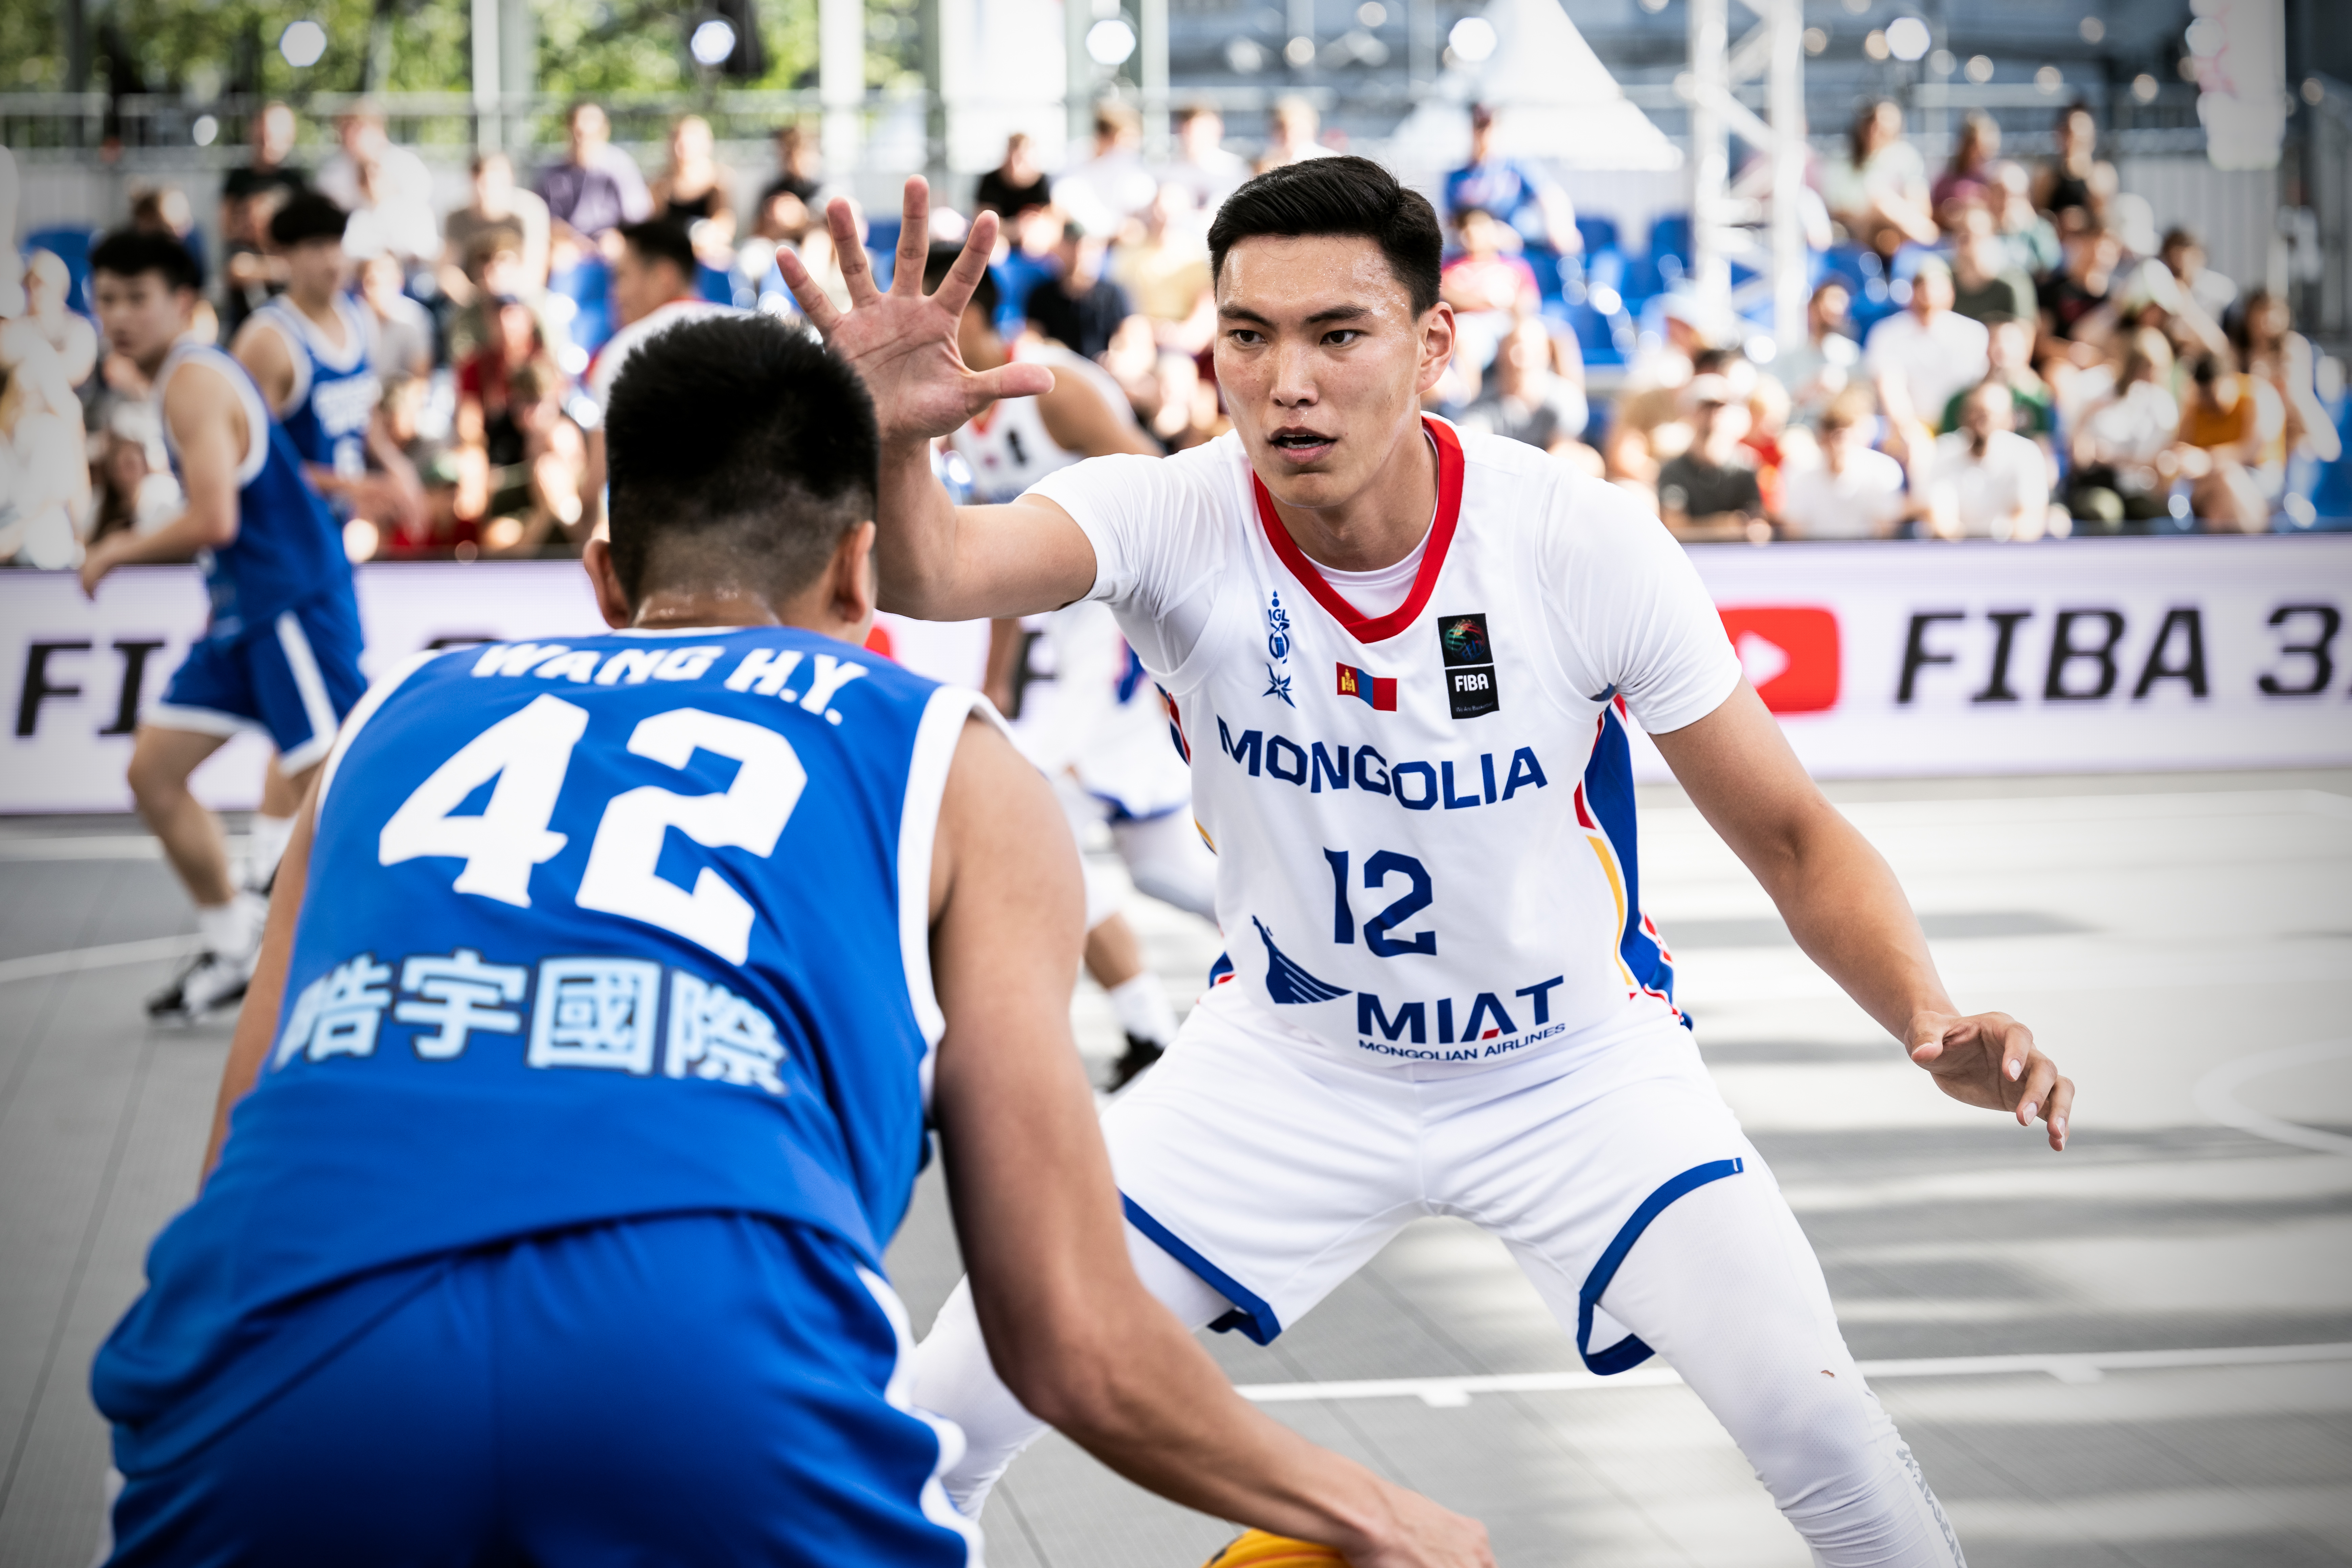 3x3 - Draw brings tough challenge for defending champs 